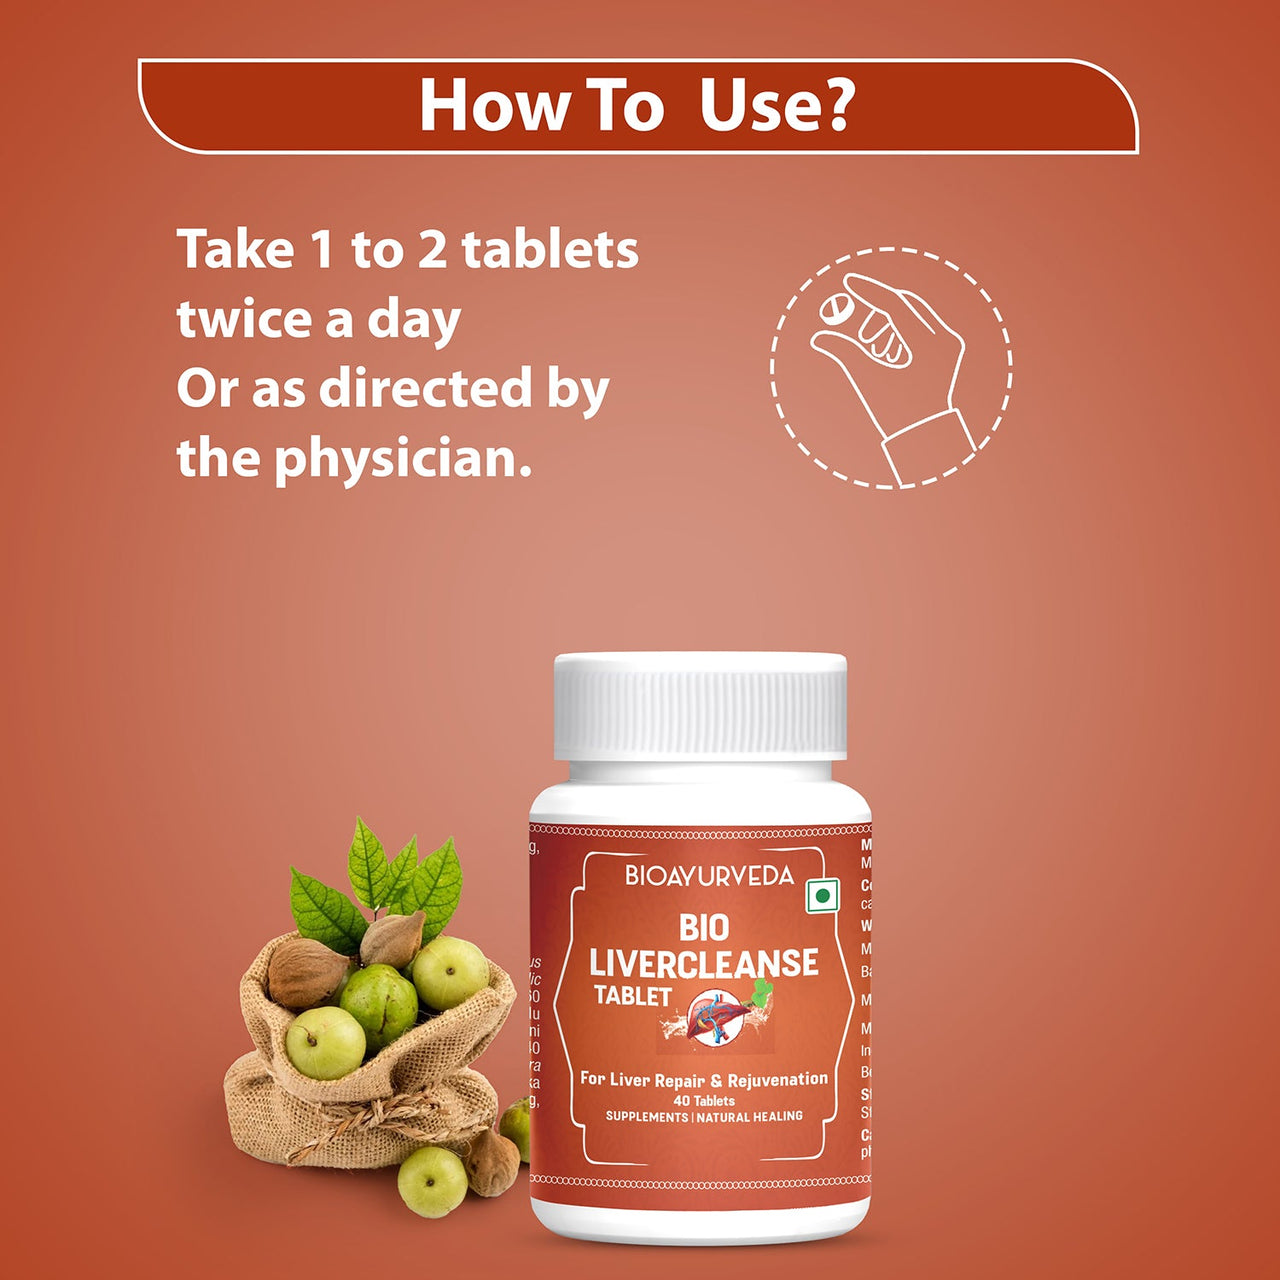 How TO Use Bio LiverCleanse Tablet